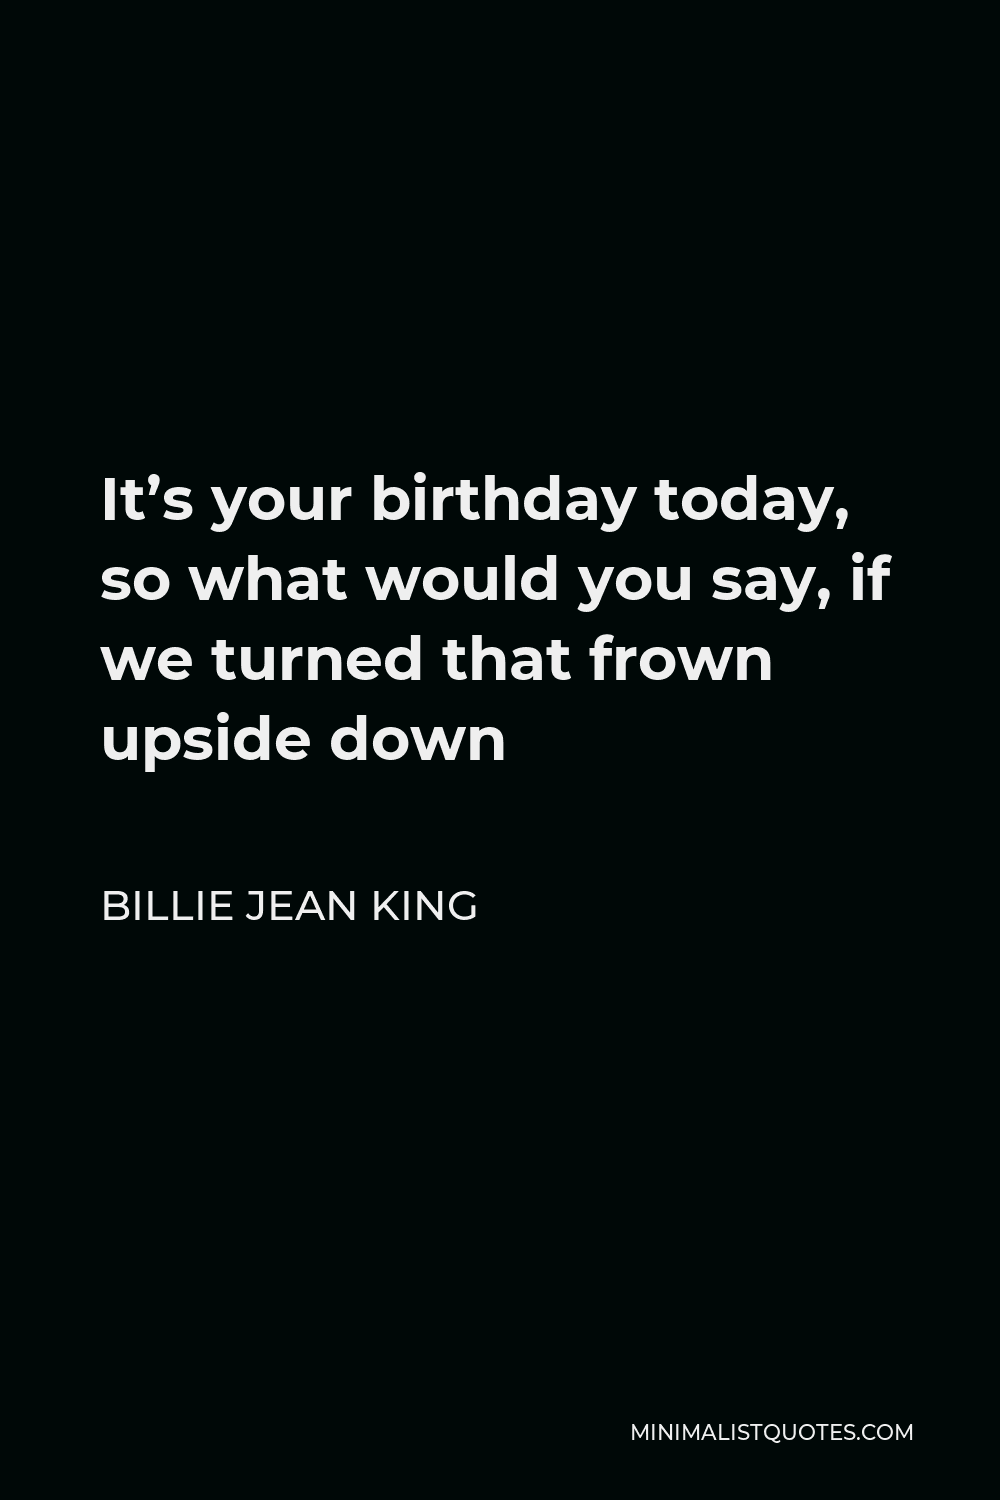 Billie Jean King Quote - It’s your birthday today, so what would you say, if we turned that frown upside down